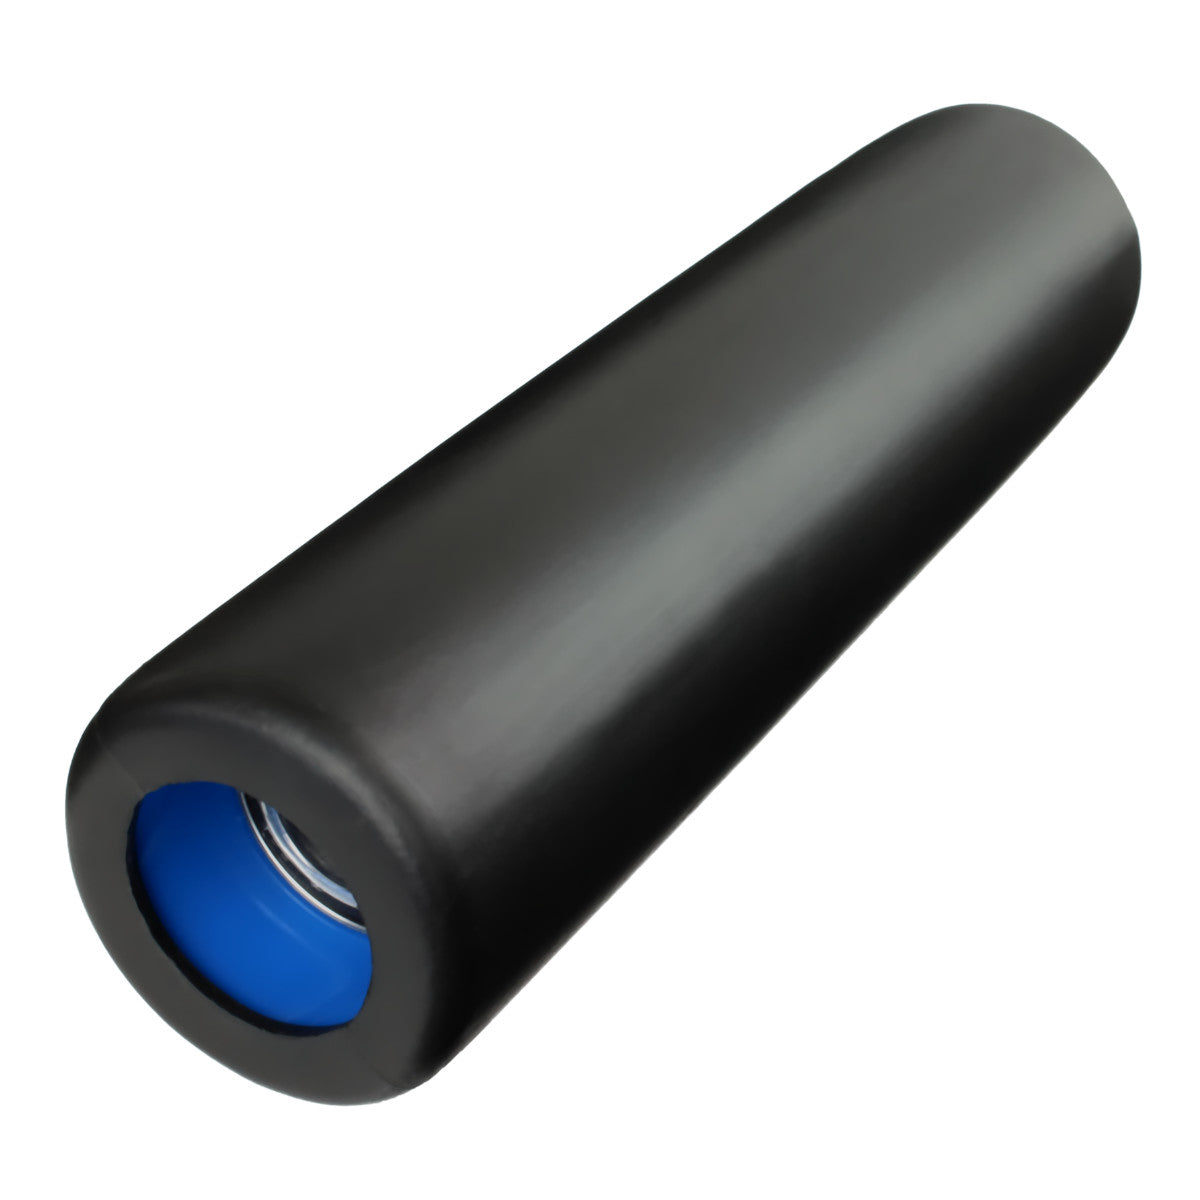 TuneUP smooth medium-density foam roller for use with DoubleUP frame